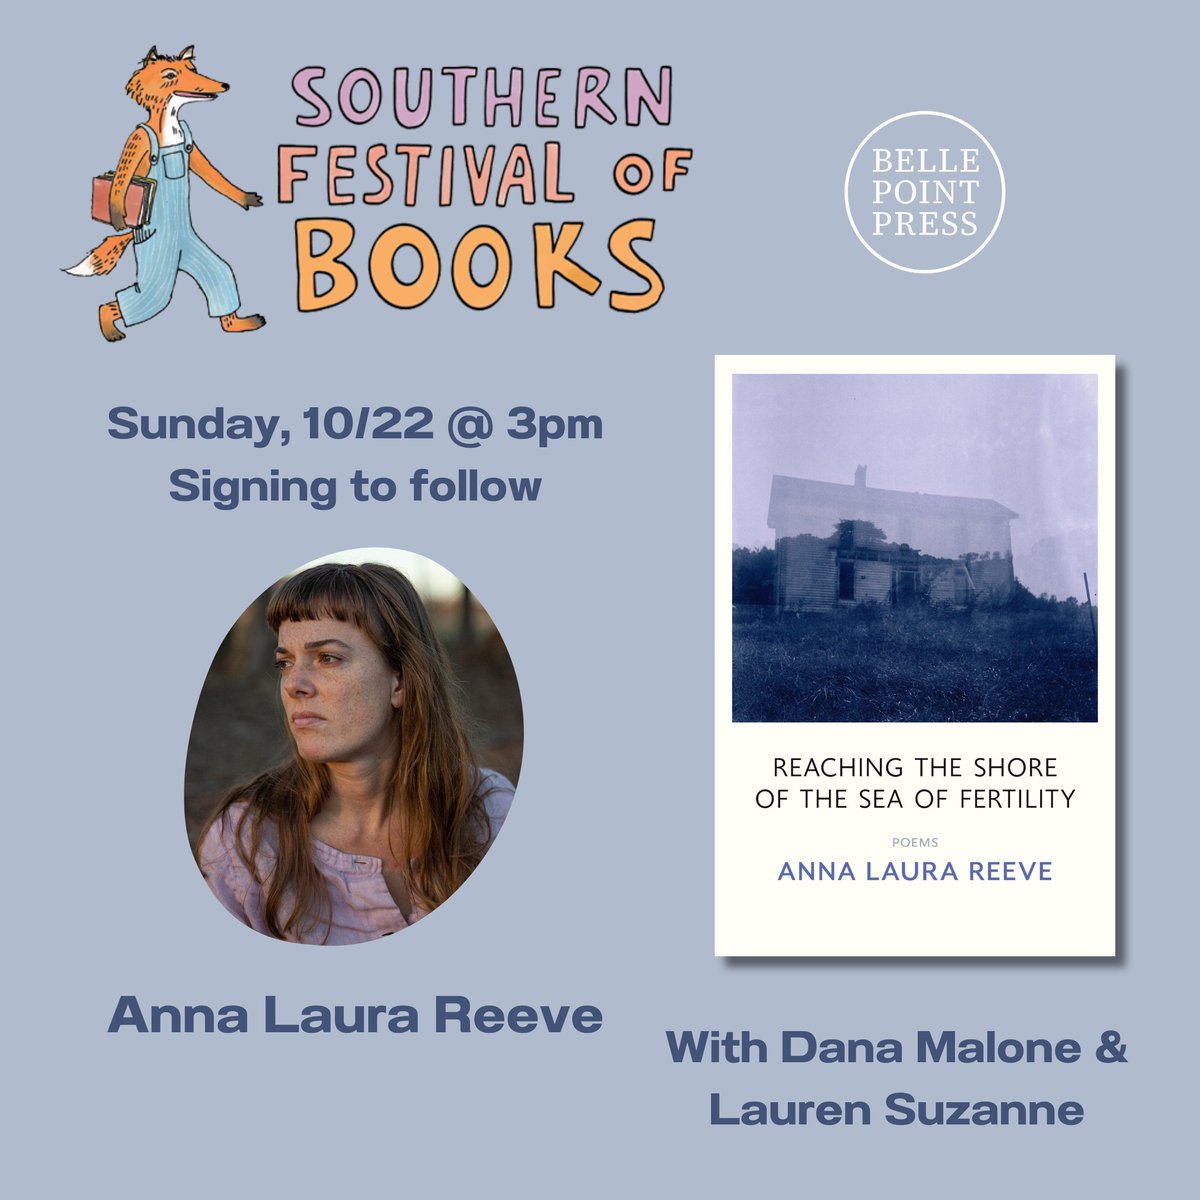 If you'll be at the @SoFestofBooks this weekend, be sure to catch @AnnaLauraReeve on Sunday afternoon!